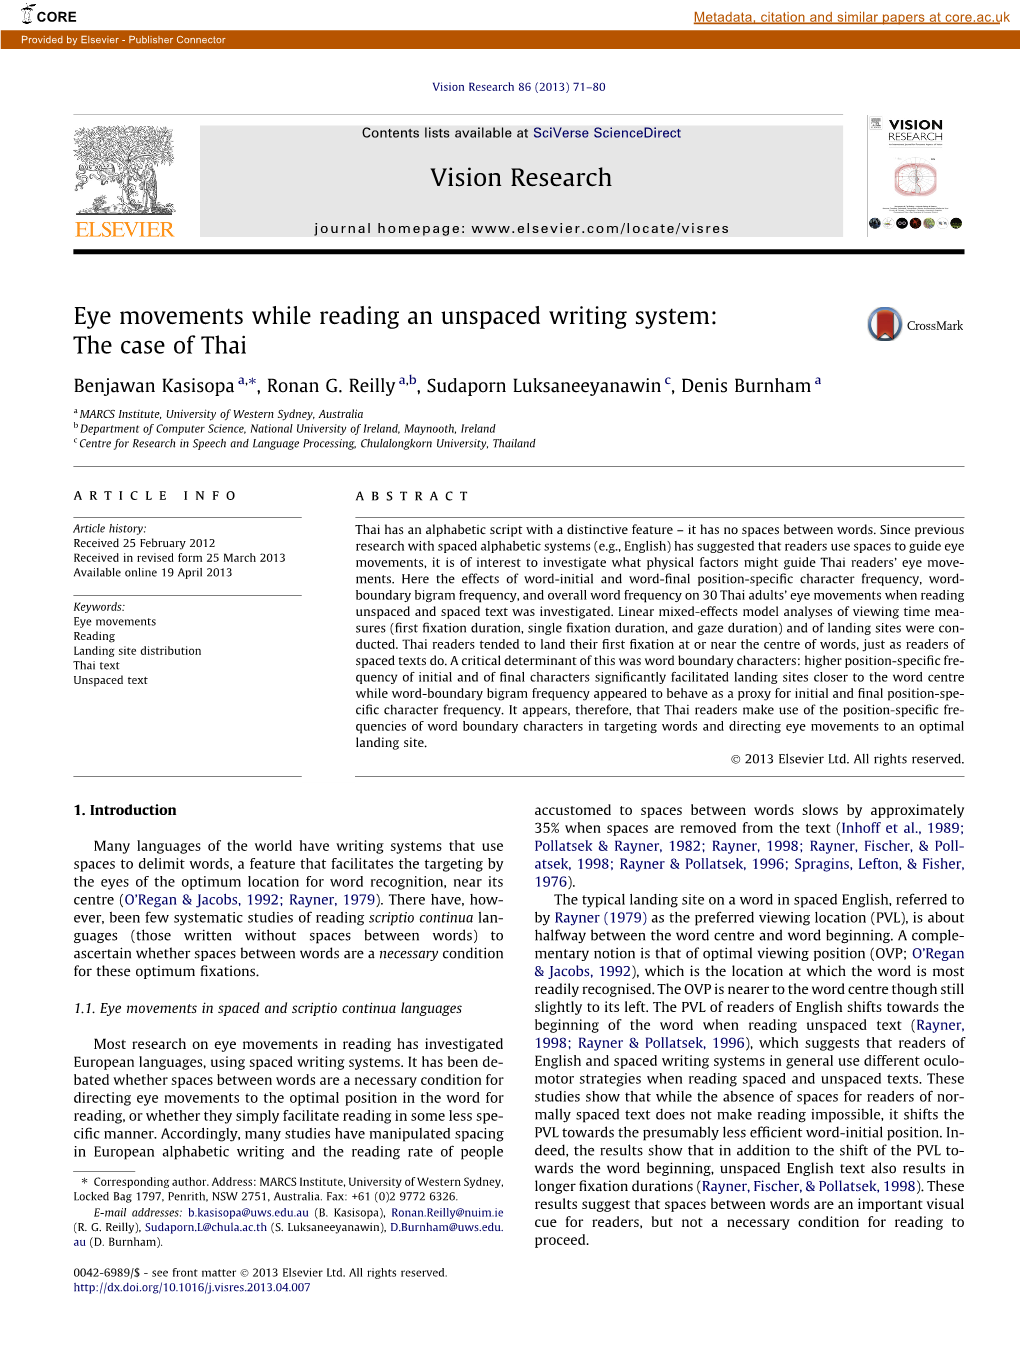 Eye Movements While Reading an Unspaced Writing System: the Case of Thai ⇑ Benjawan Kasisopa A, , Ronan G